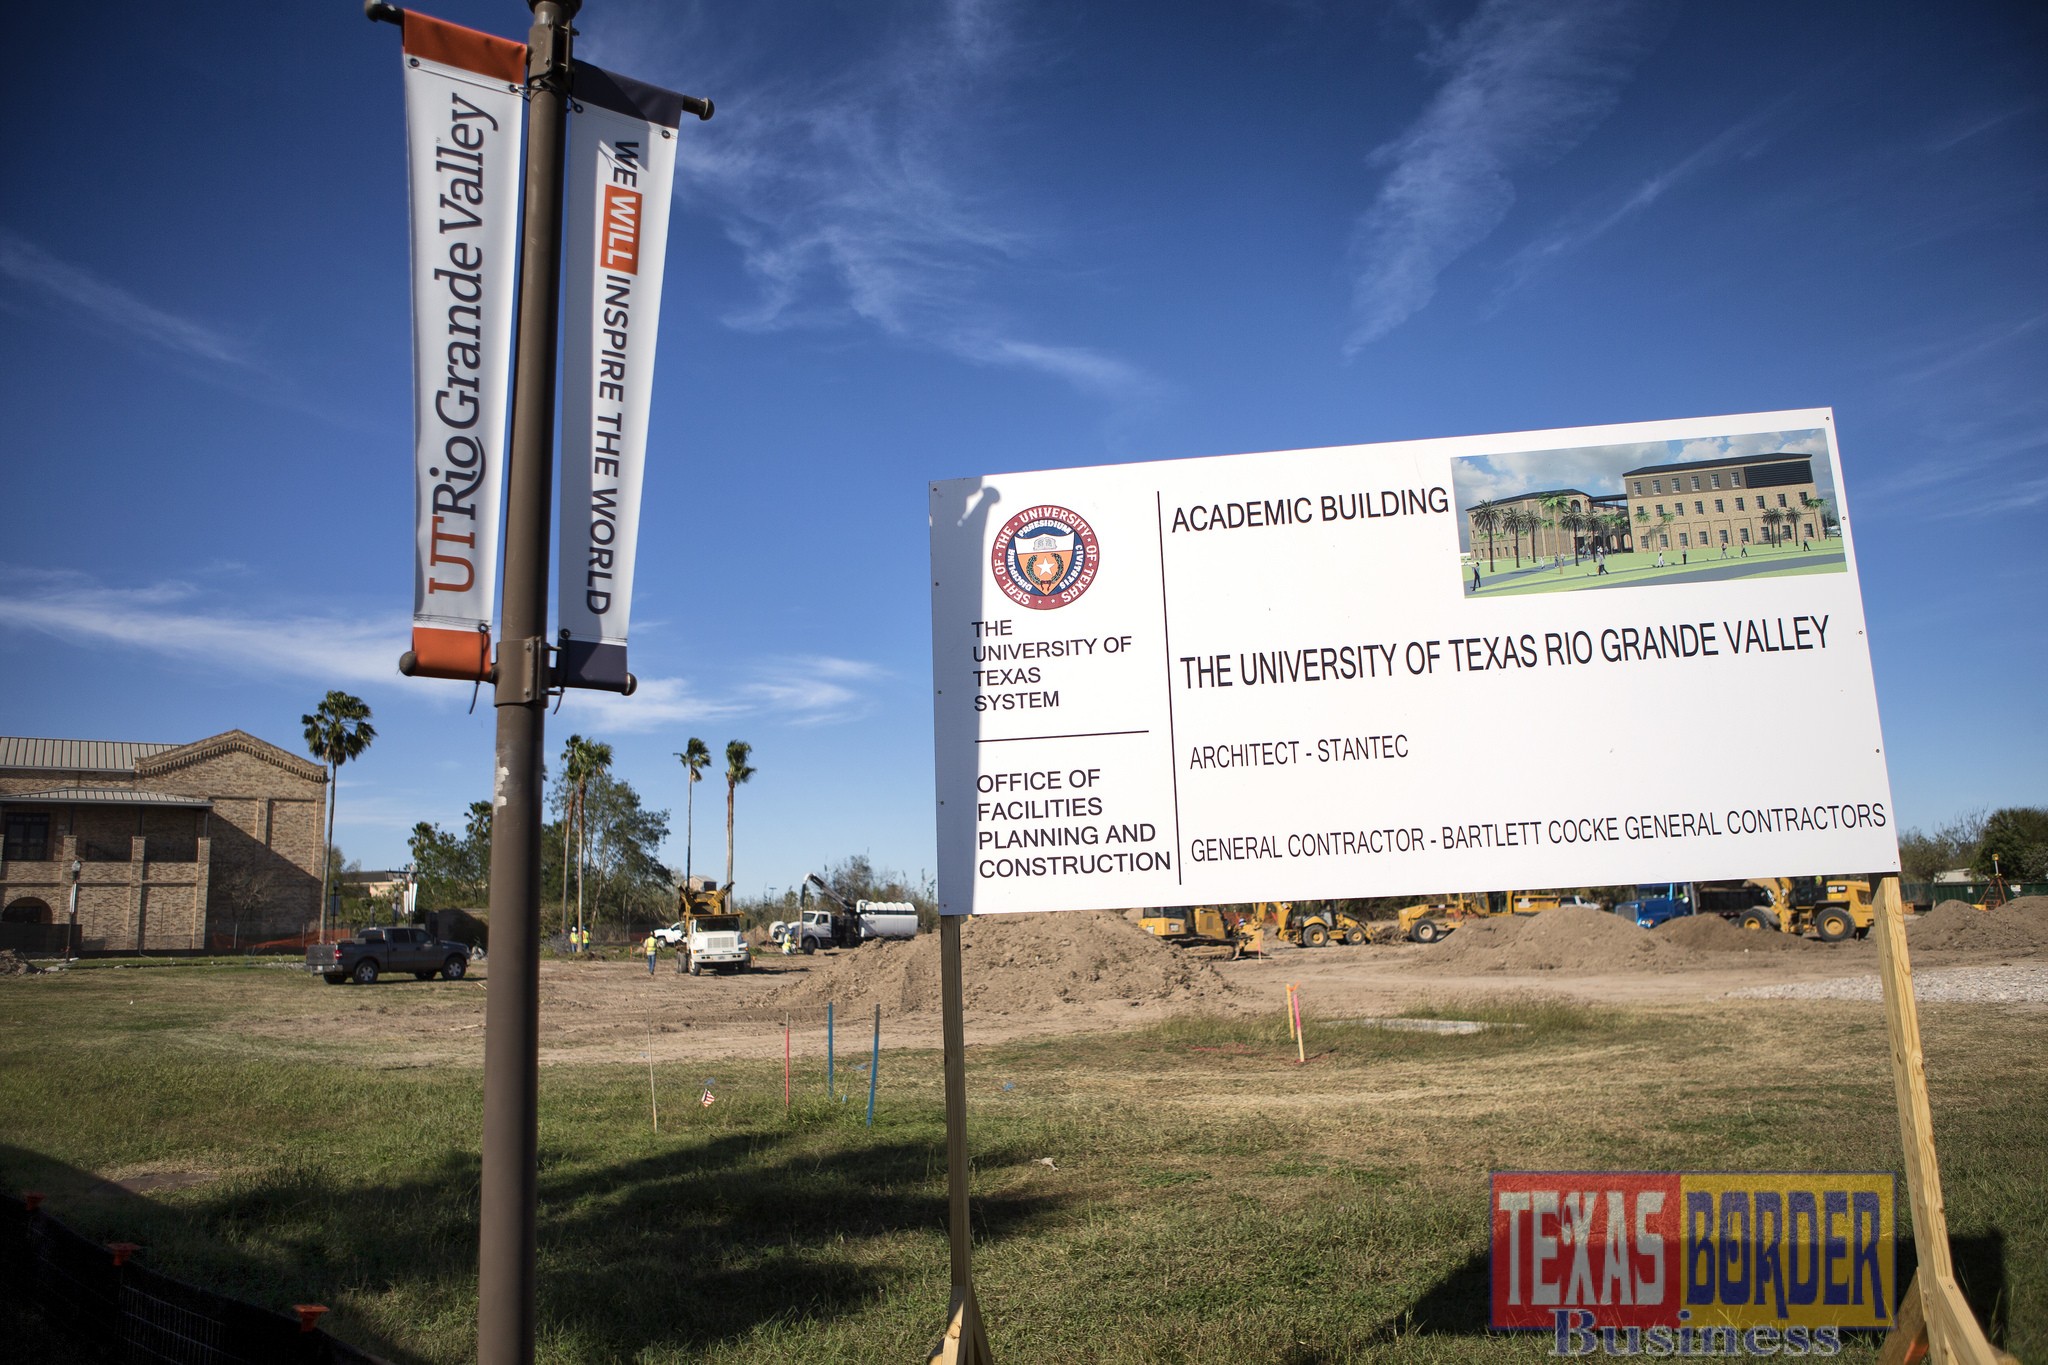 On the UTRGV Brownsville Campus, site preparation is underway on the 102,551-square-foot Academic Building, which will provide space for general academics, music instruction and recitals, science teaching labs, and study space. The university is celebrating the new construction with an event called “Can You Dig It,” noon to 1:30 p.m. Tuesday, March 22, next to Main on the circular drive. (UTRGV Photo by David Pike)